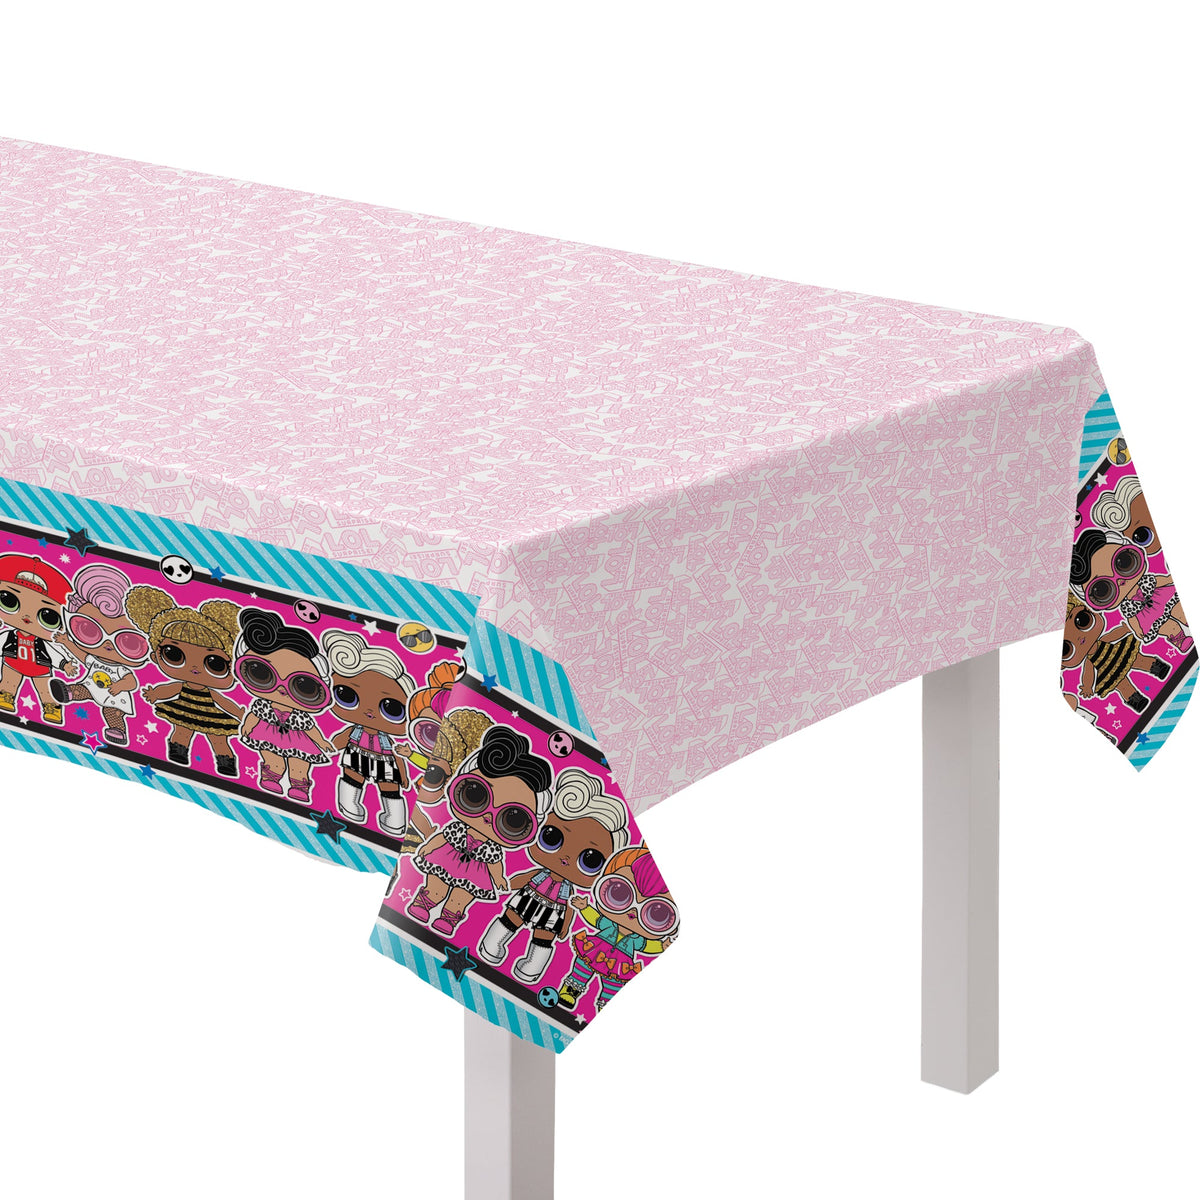 LOL Surprise, Together 4 Eva! Plastic Table Cover 54" x 96"